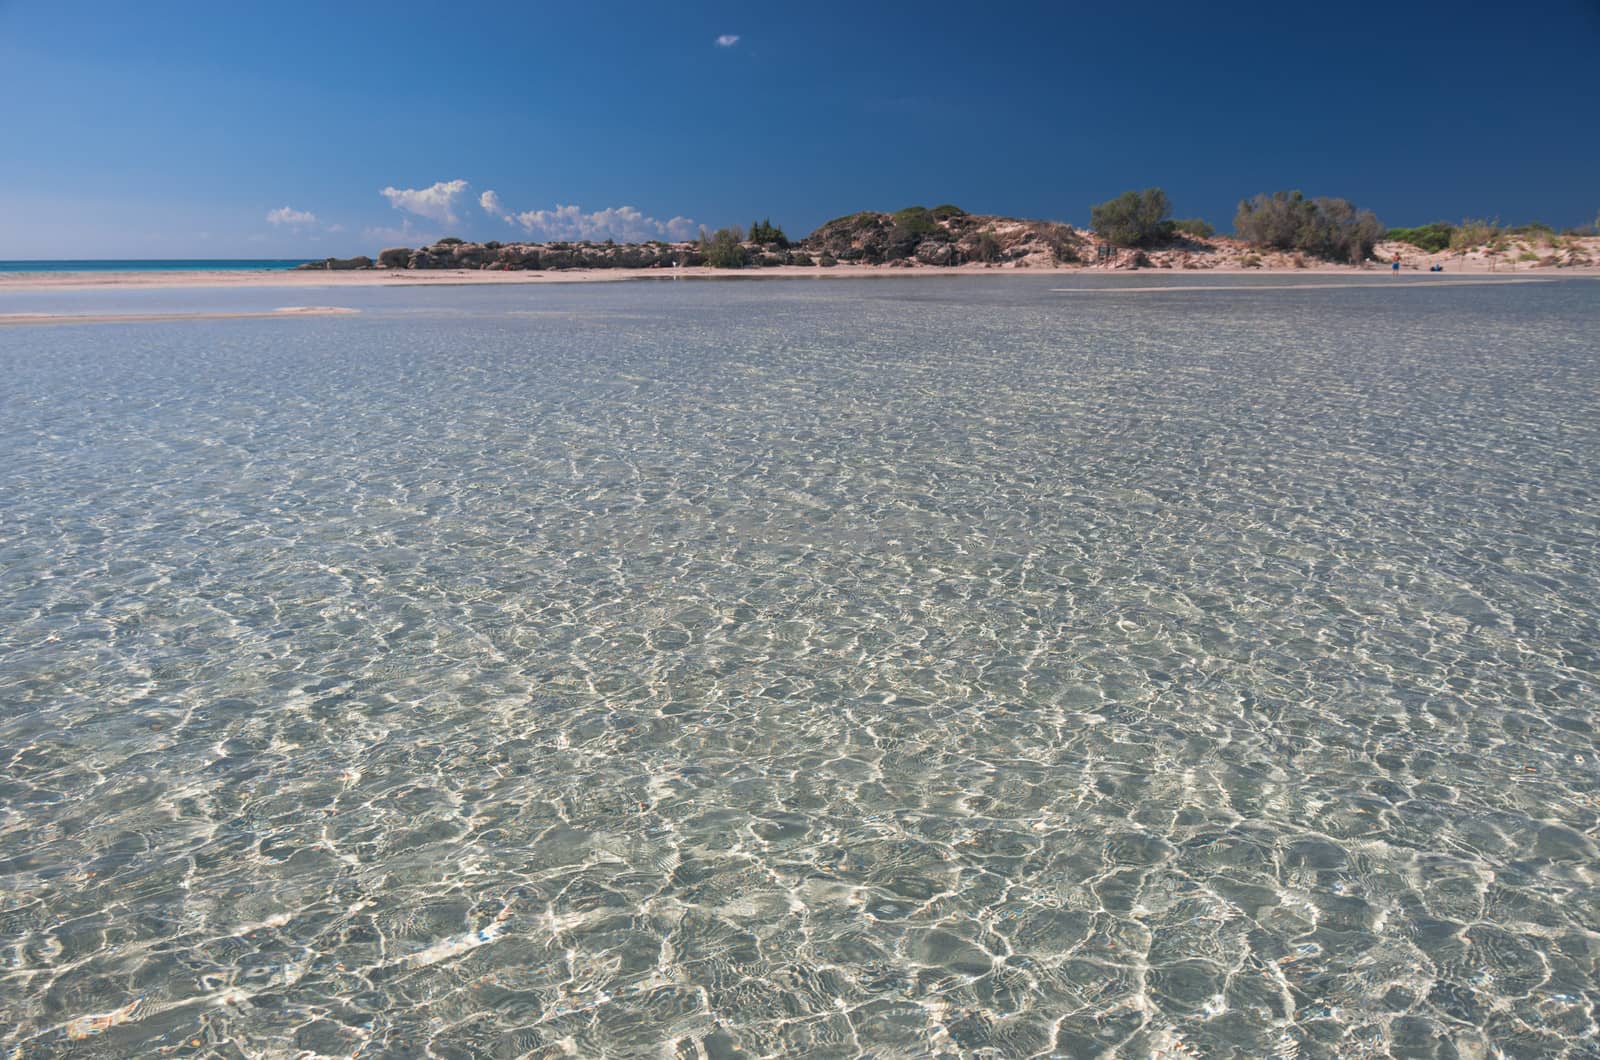 The transparent waters of Elafonisi in Crete island